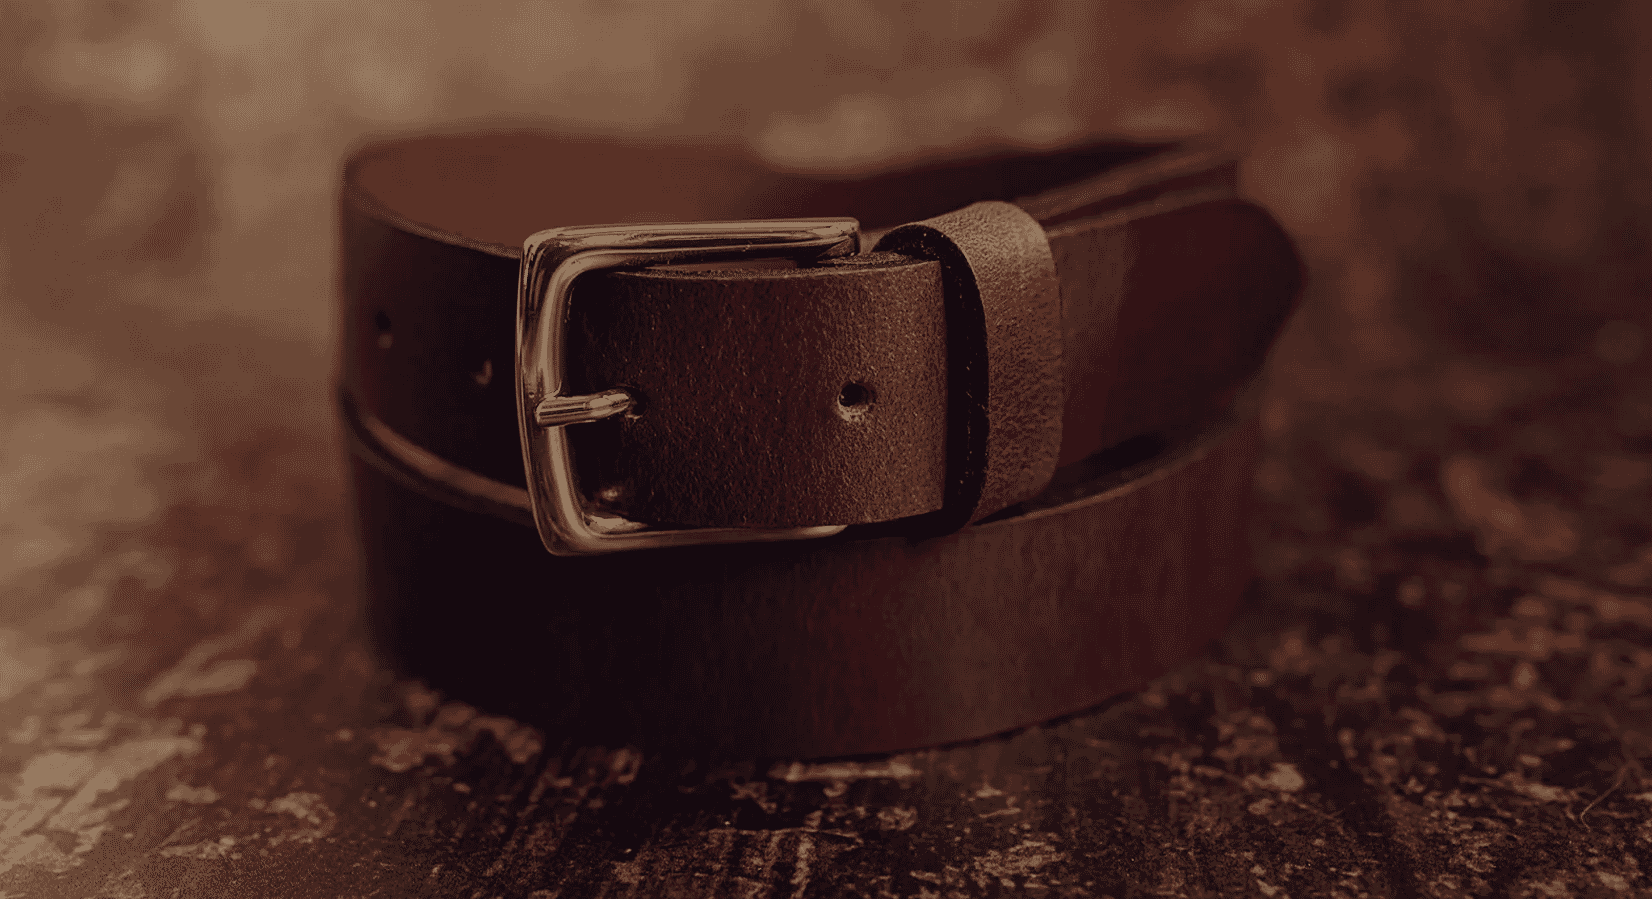 Will Leather Goods Hand Braided Leather Belt - Brown/Black, Belts